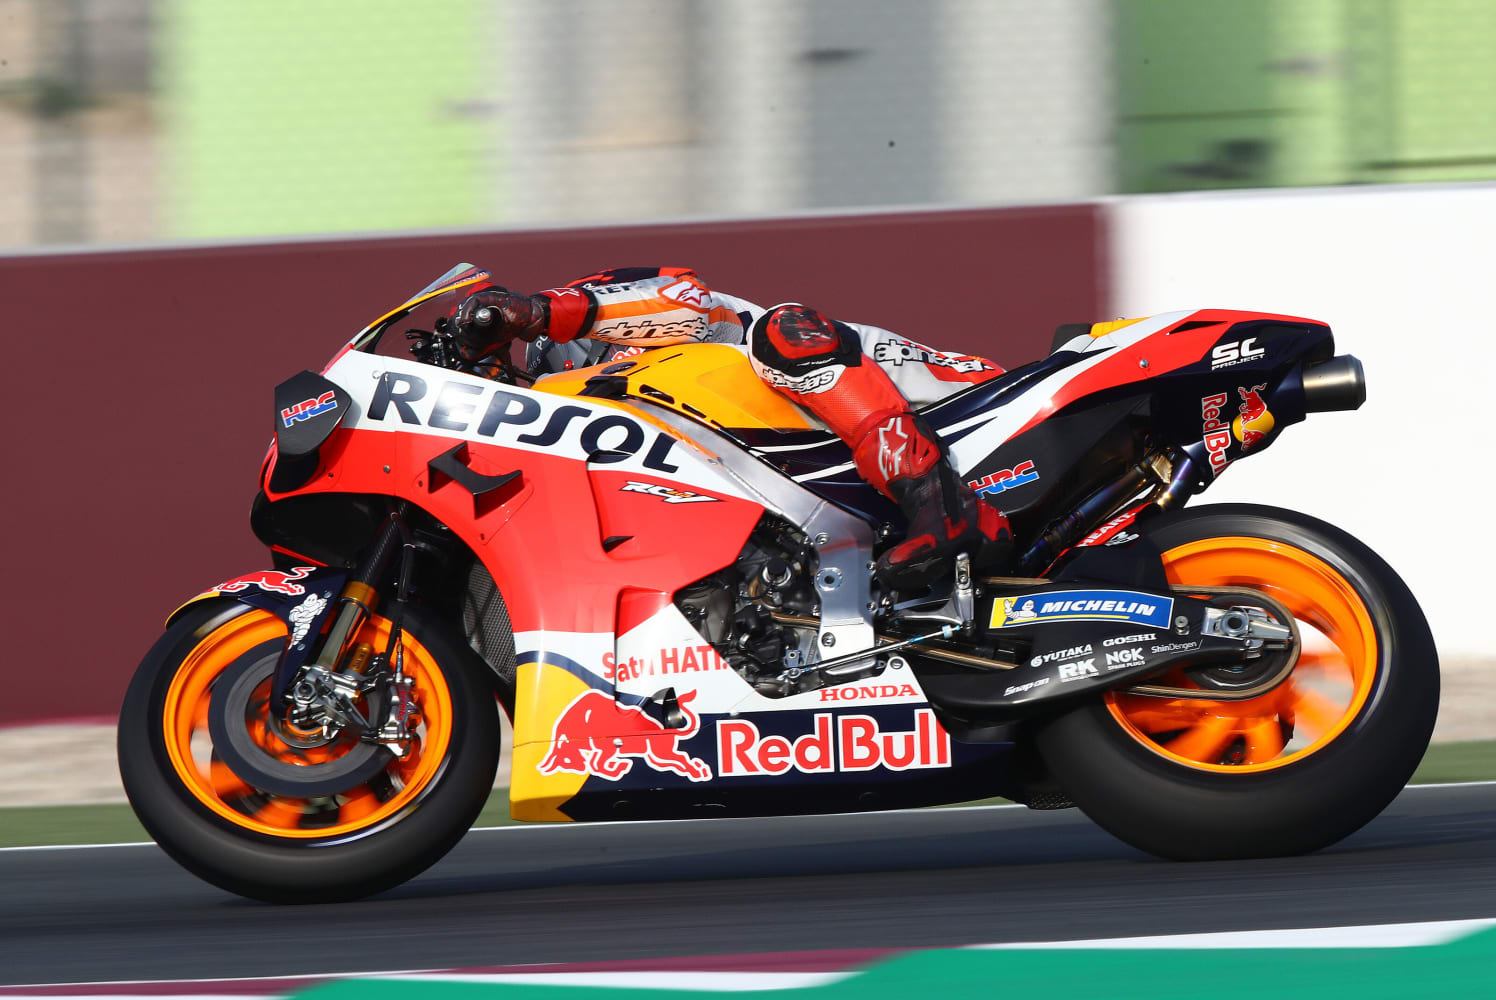 Motogp Bike Quiz How Much Do You Know About The Bikes